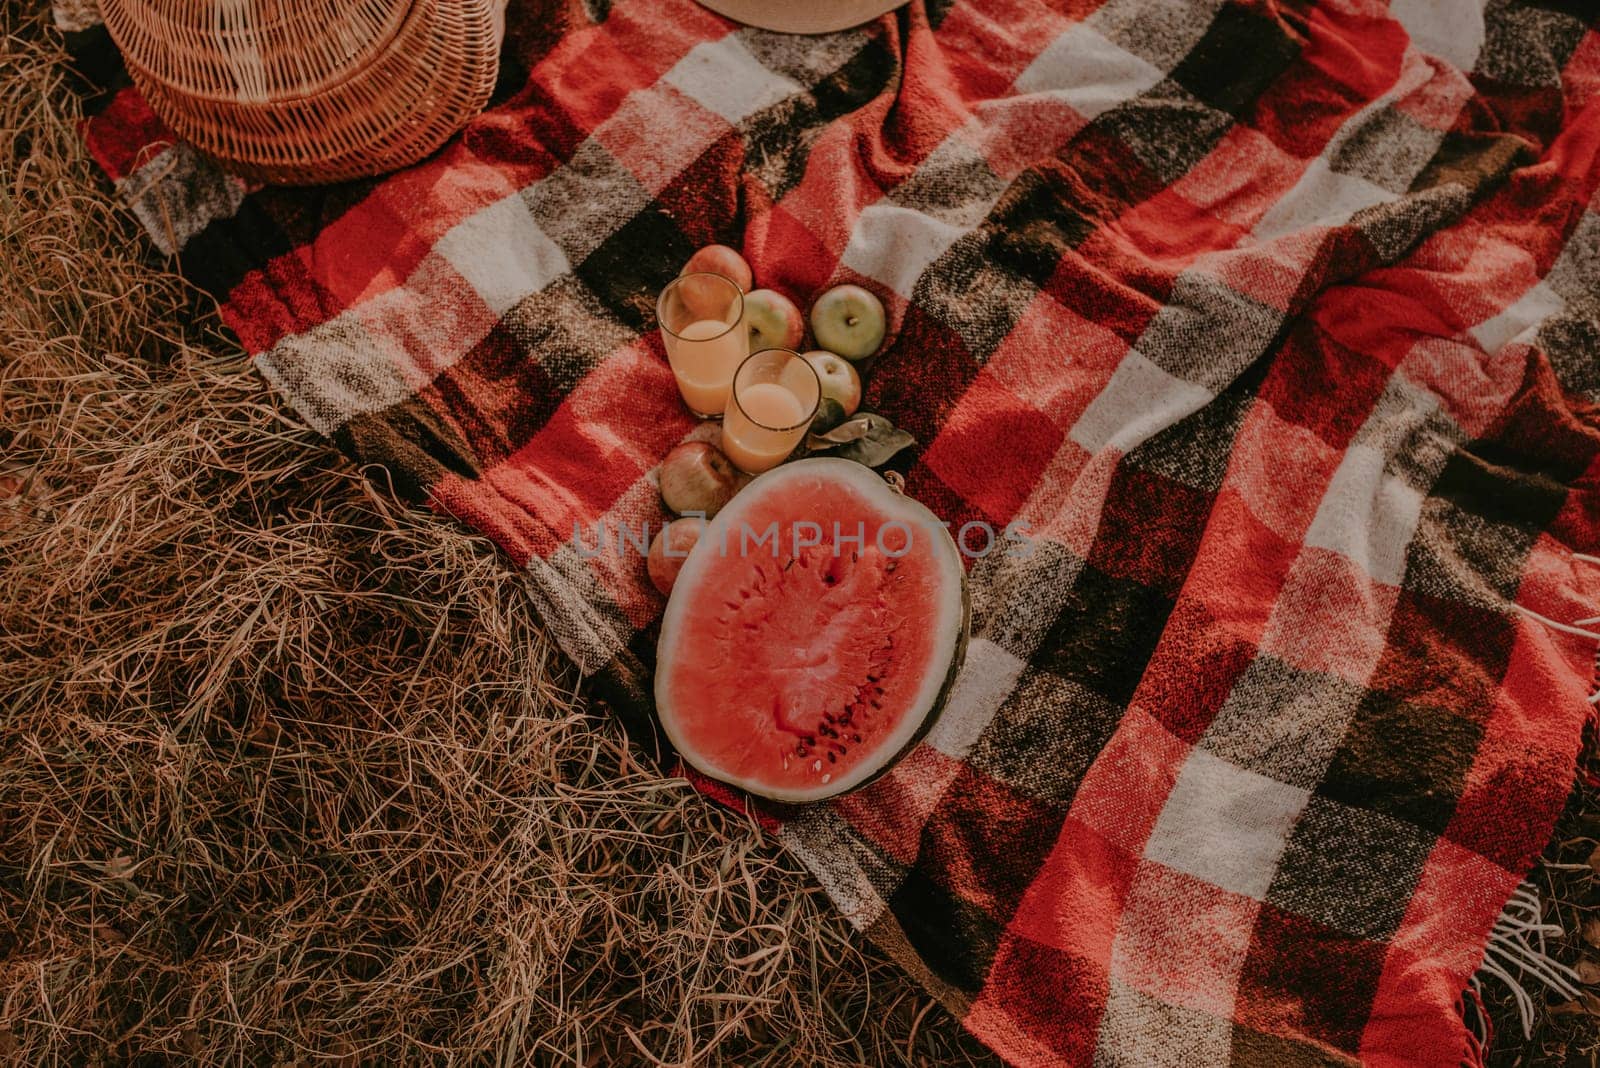 Travel blanket checkered red plaid on grass in summer on sunny day for picnic. wicker basket, scattered fruits, ripe apples, juicy cut watermelon seeds, straw hat. Camping, holiday, rest at nature